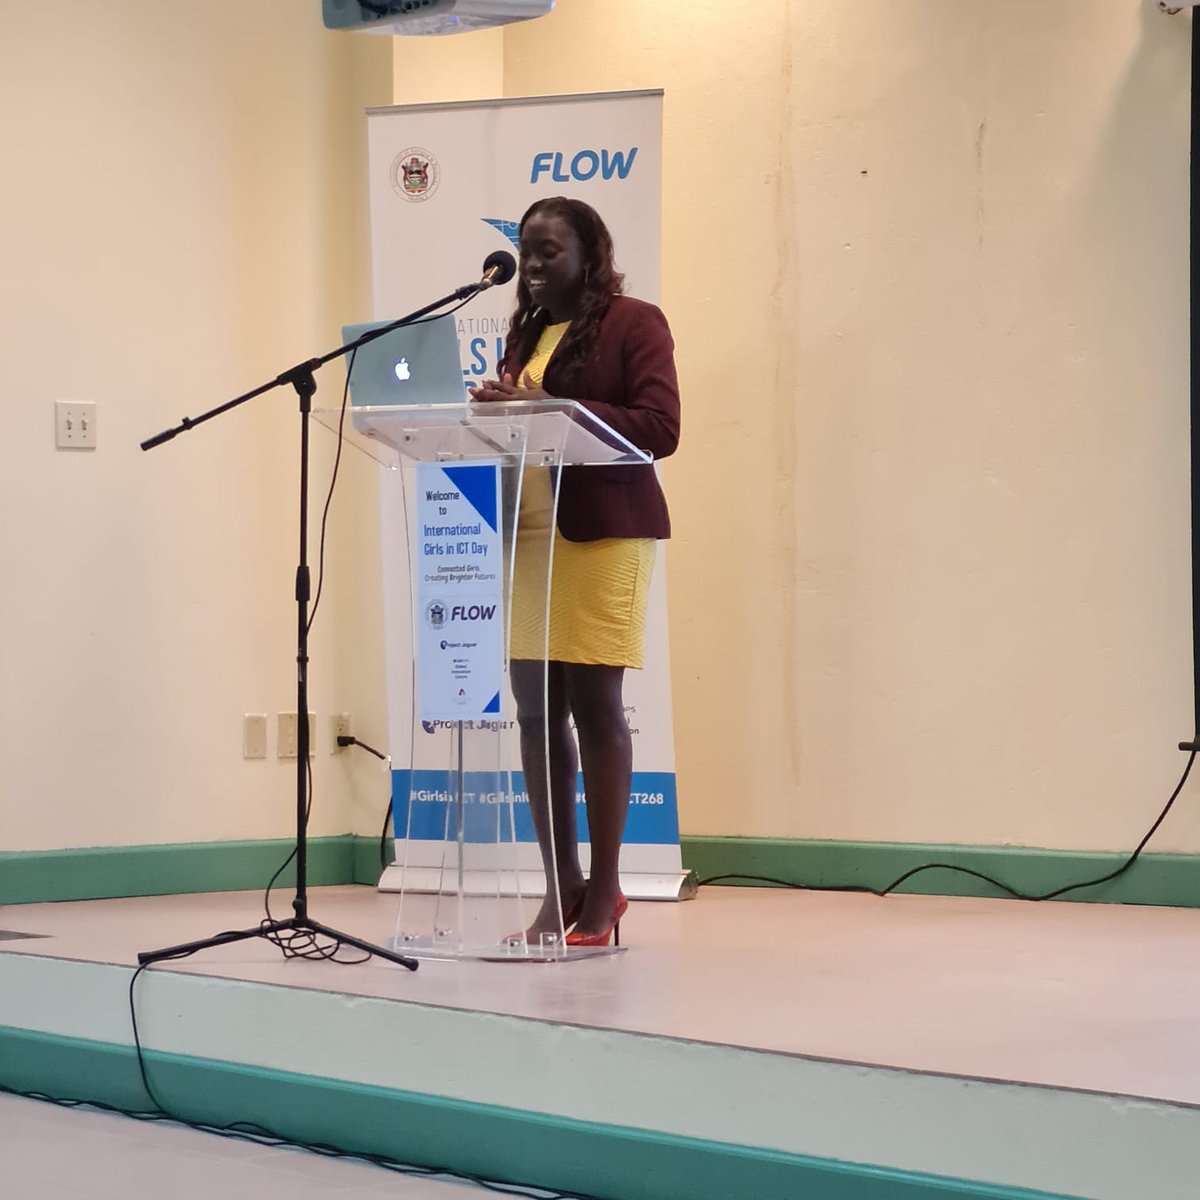 Today, I spoke at the International Girl's in ICT Day Opening Ceremony to a room full of future leaders. 

We must commit to equipping girls with the technical skills, bravery and sisterhood that they need to take their destiny into their own hands. 

#InternationalGirlsinICTDay